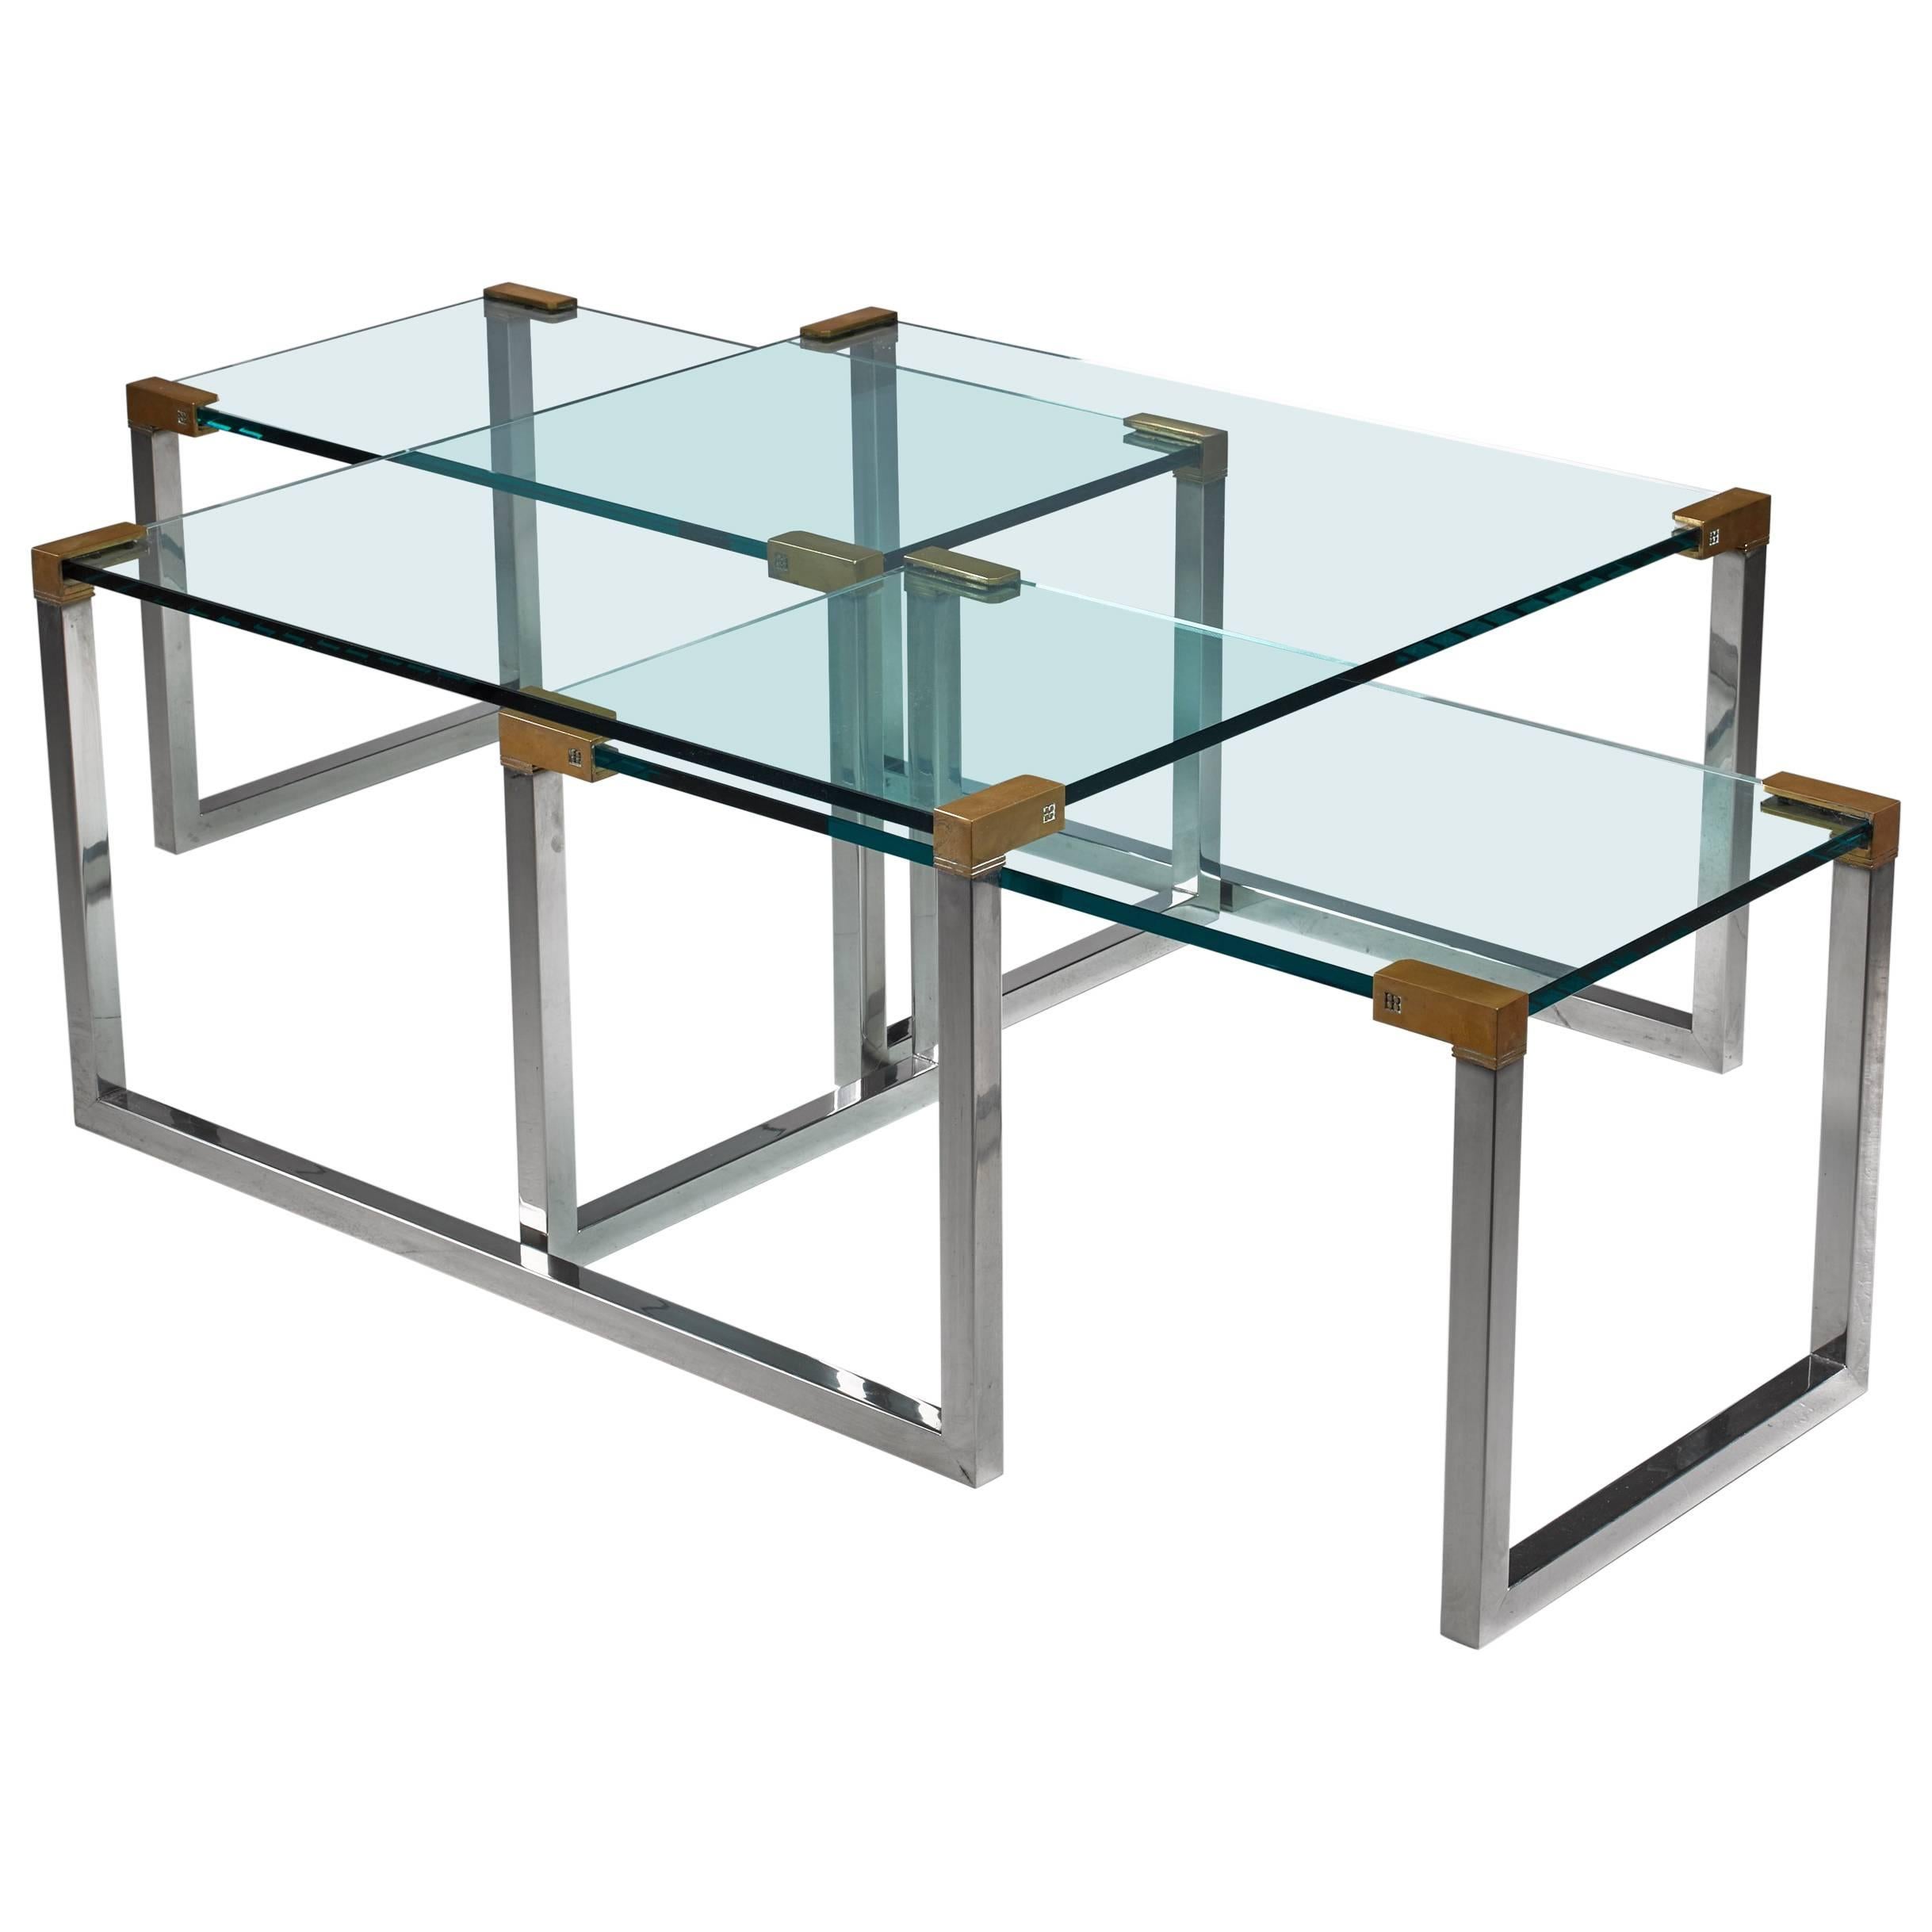 A set of three modular side or coffee tables by Dutch-Hungarian designer Peter Ghyczy. The tables are made of a chrome and brass frame with a glass top.

The measurements stated are of the large table. The two smaller tables are 45 by 83 cm and 42